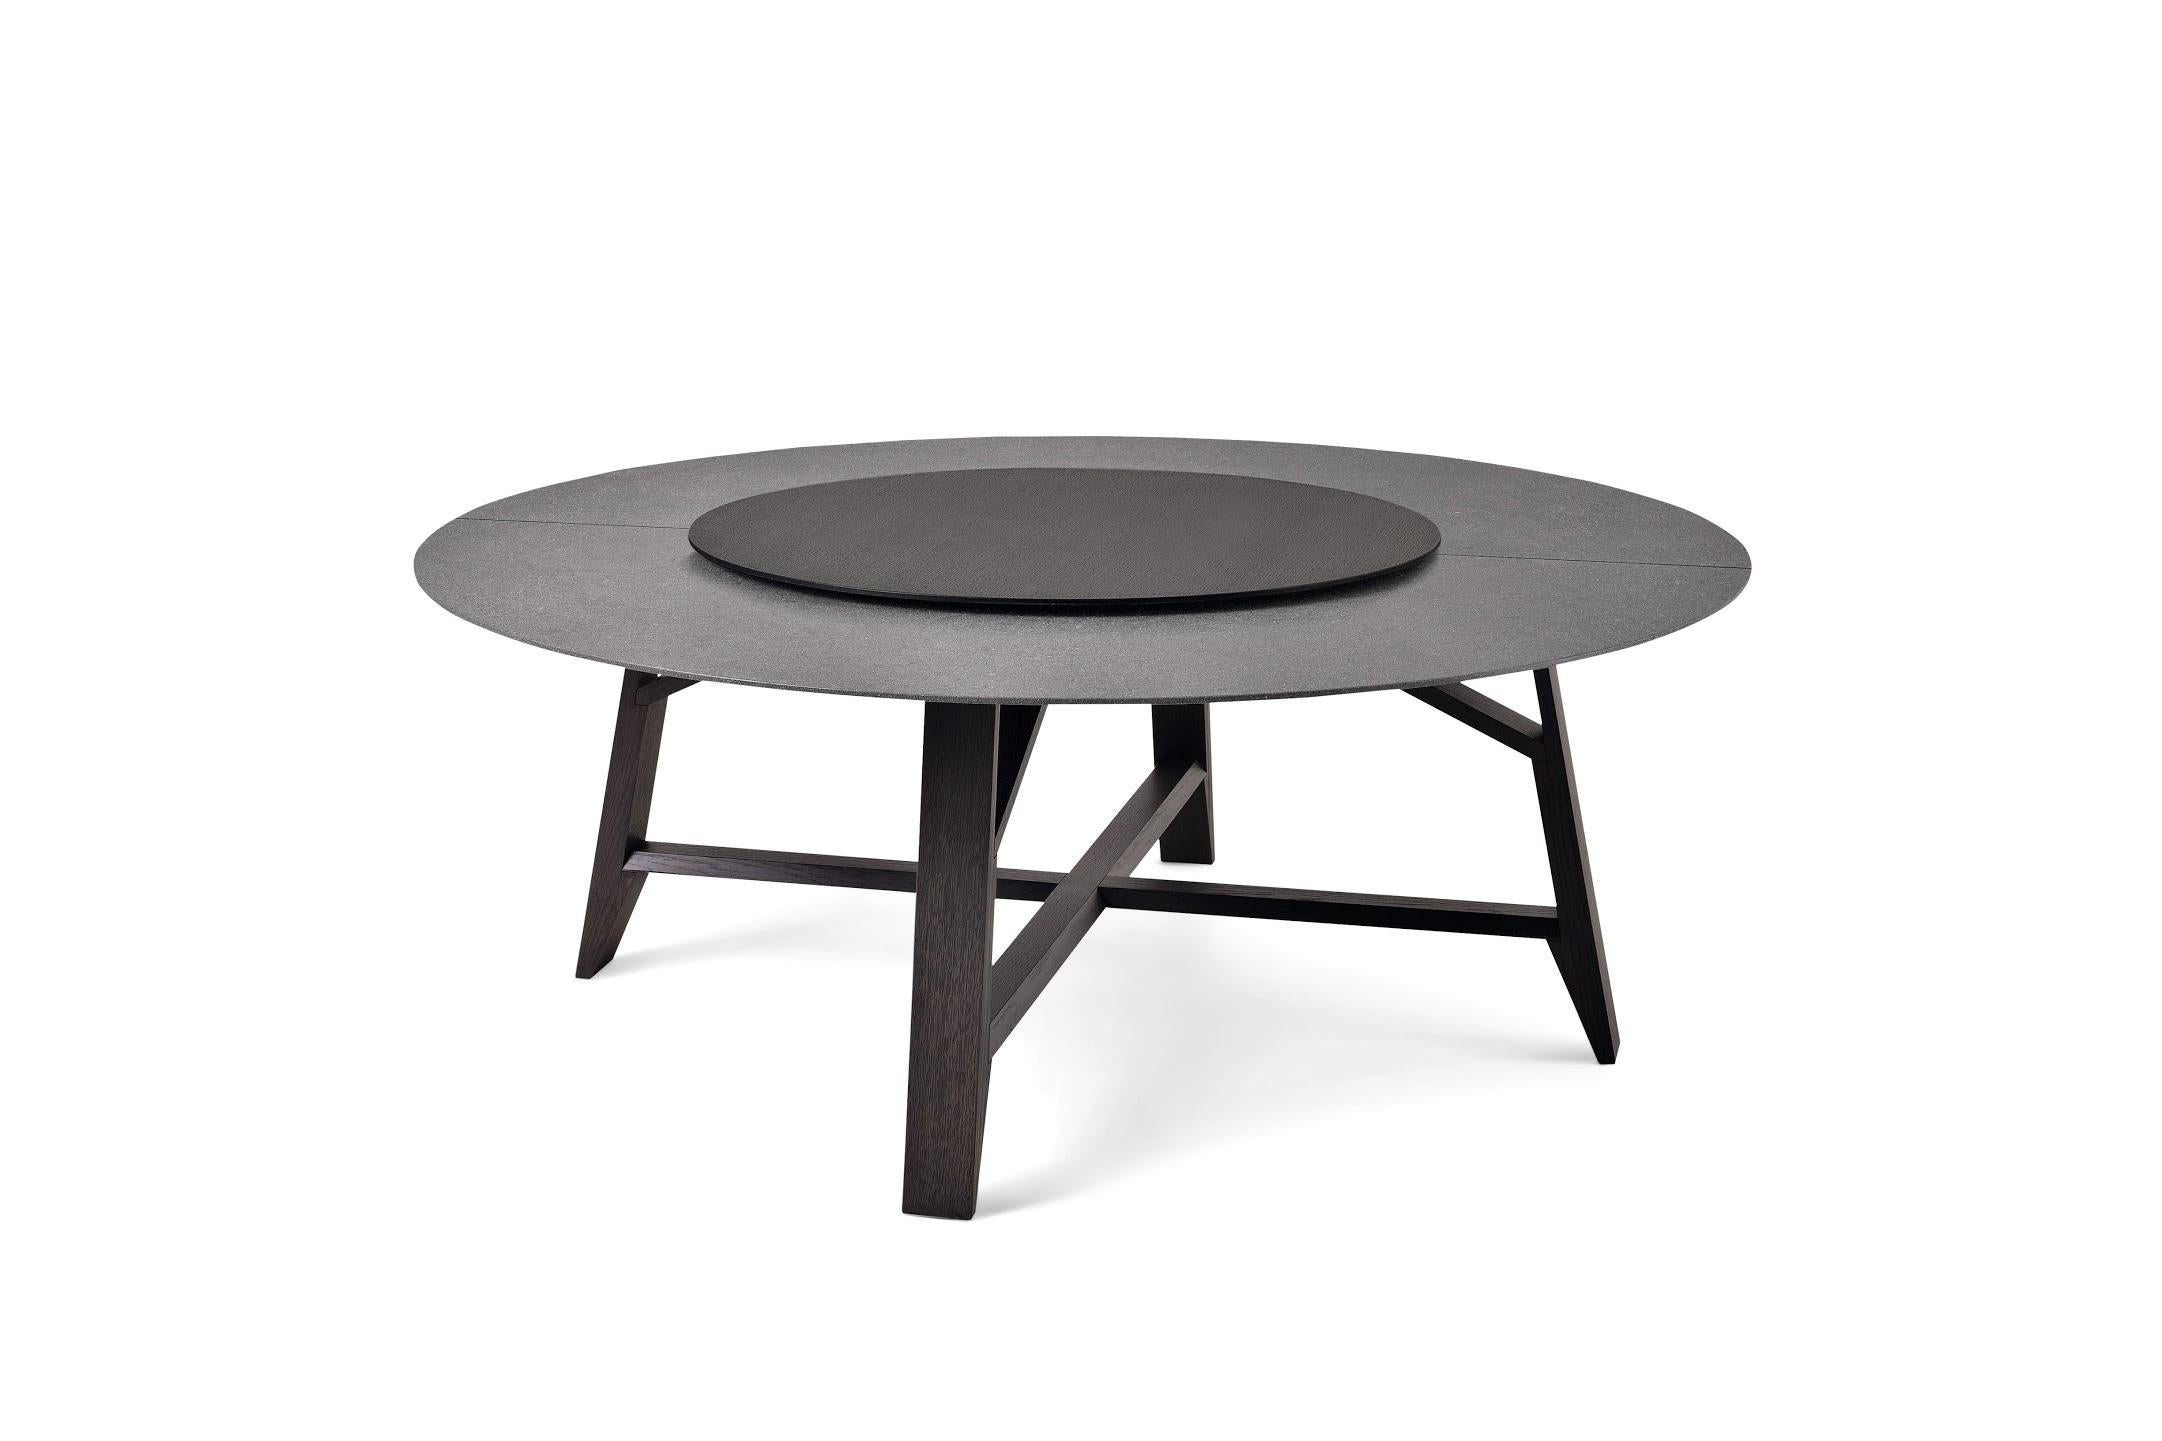 The Controvento table is an expression of the contemporary lifestyle. Its name comes from the perfect blend of form and functionality, the foundation of the designer’s creativity vocation. The characteristic feature of the product is the